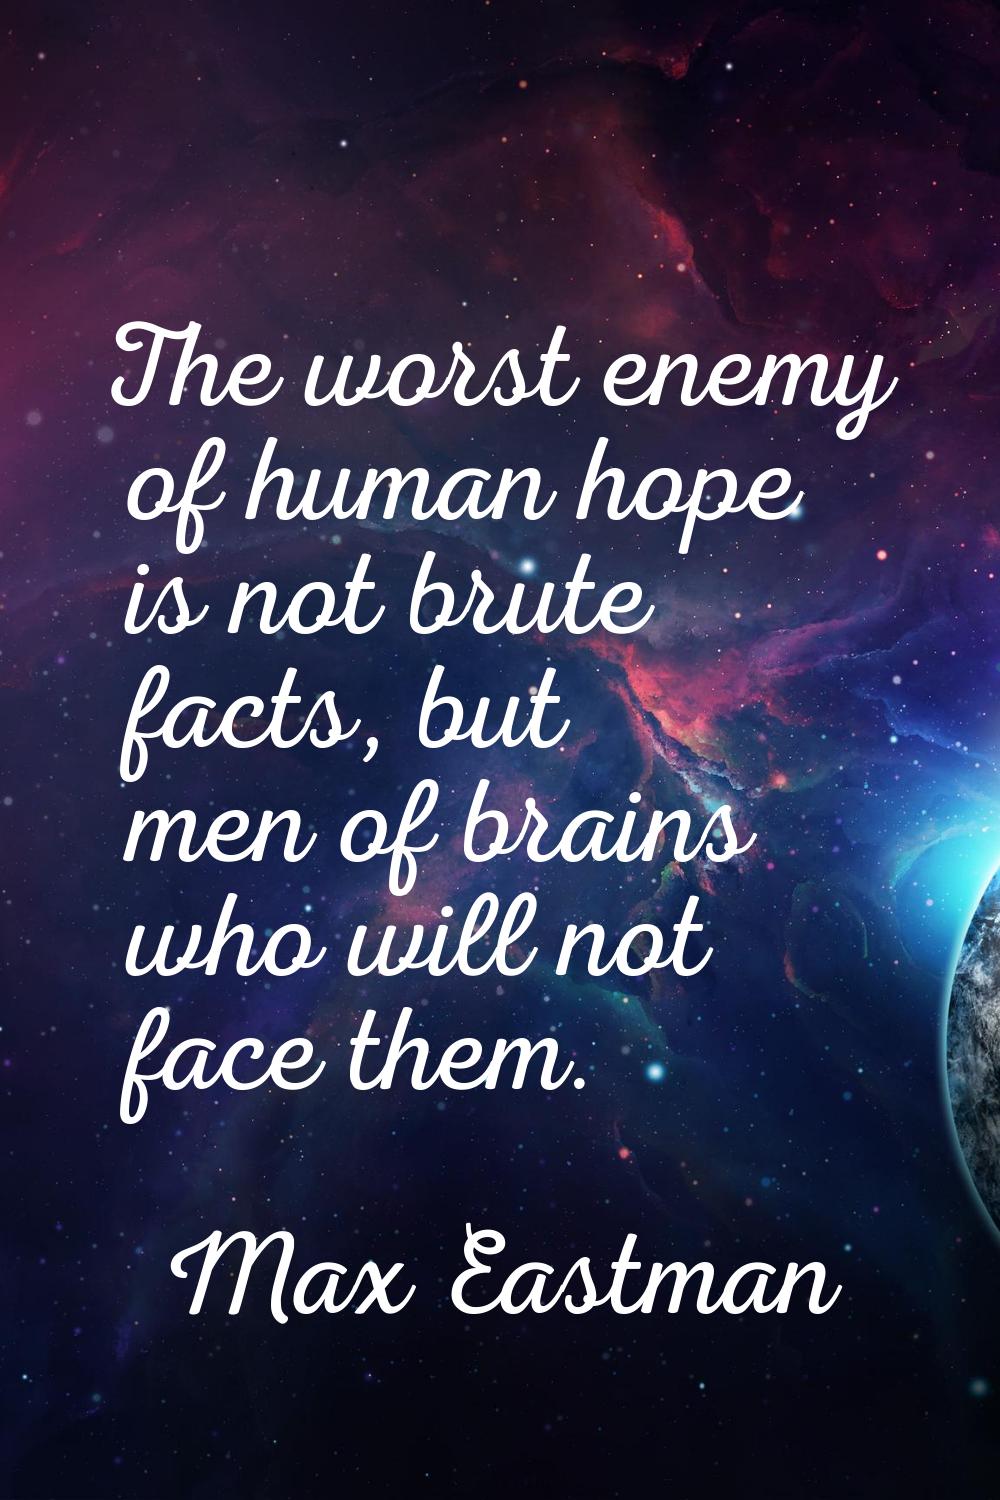 The worst enemy of human hope is not brute facts, but men of brains who will not face them.